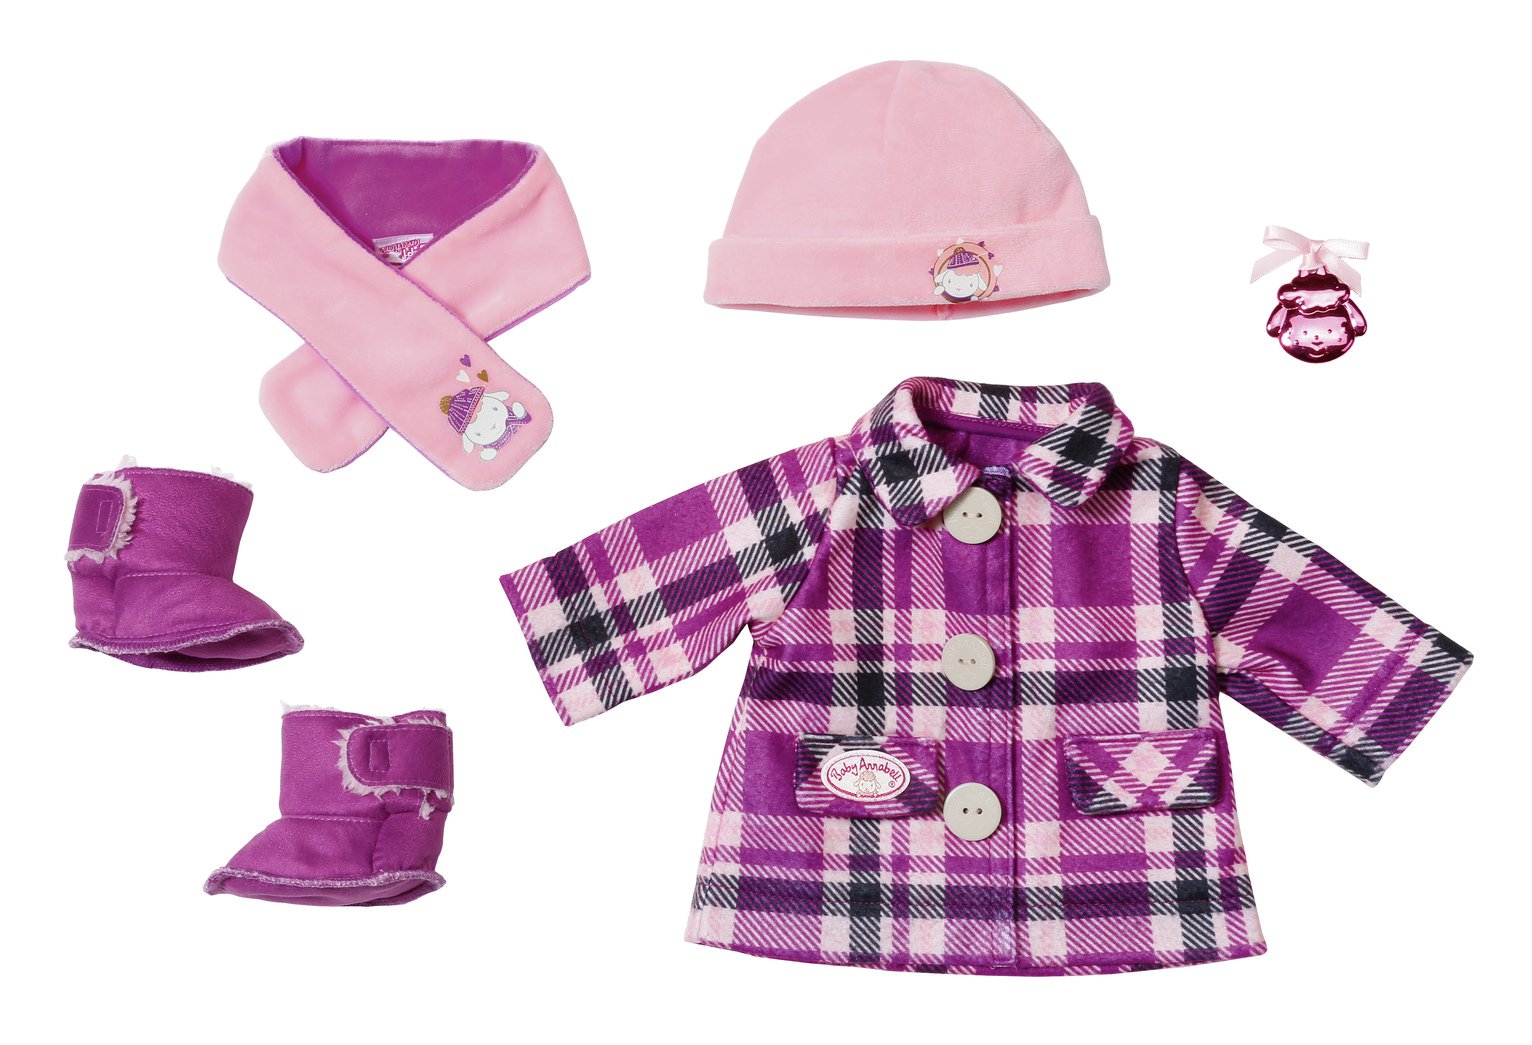 Baby Annabell Deluxe Coat Set Review